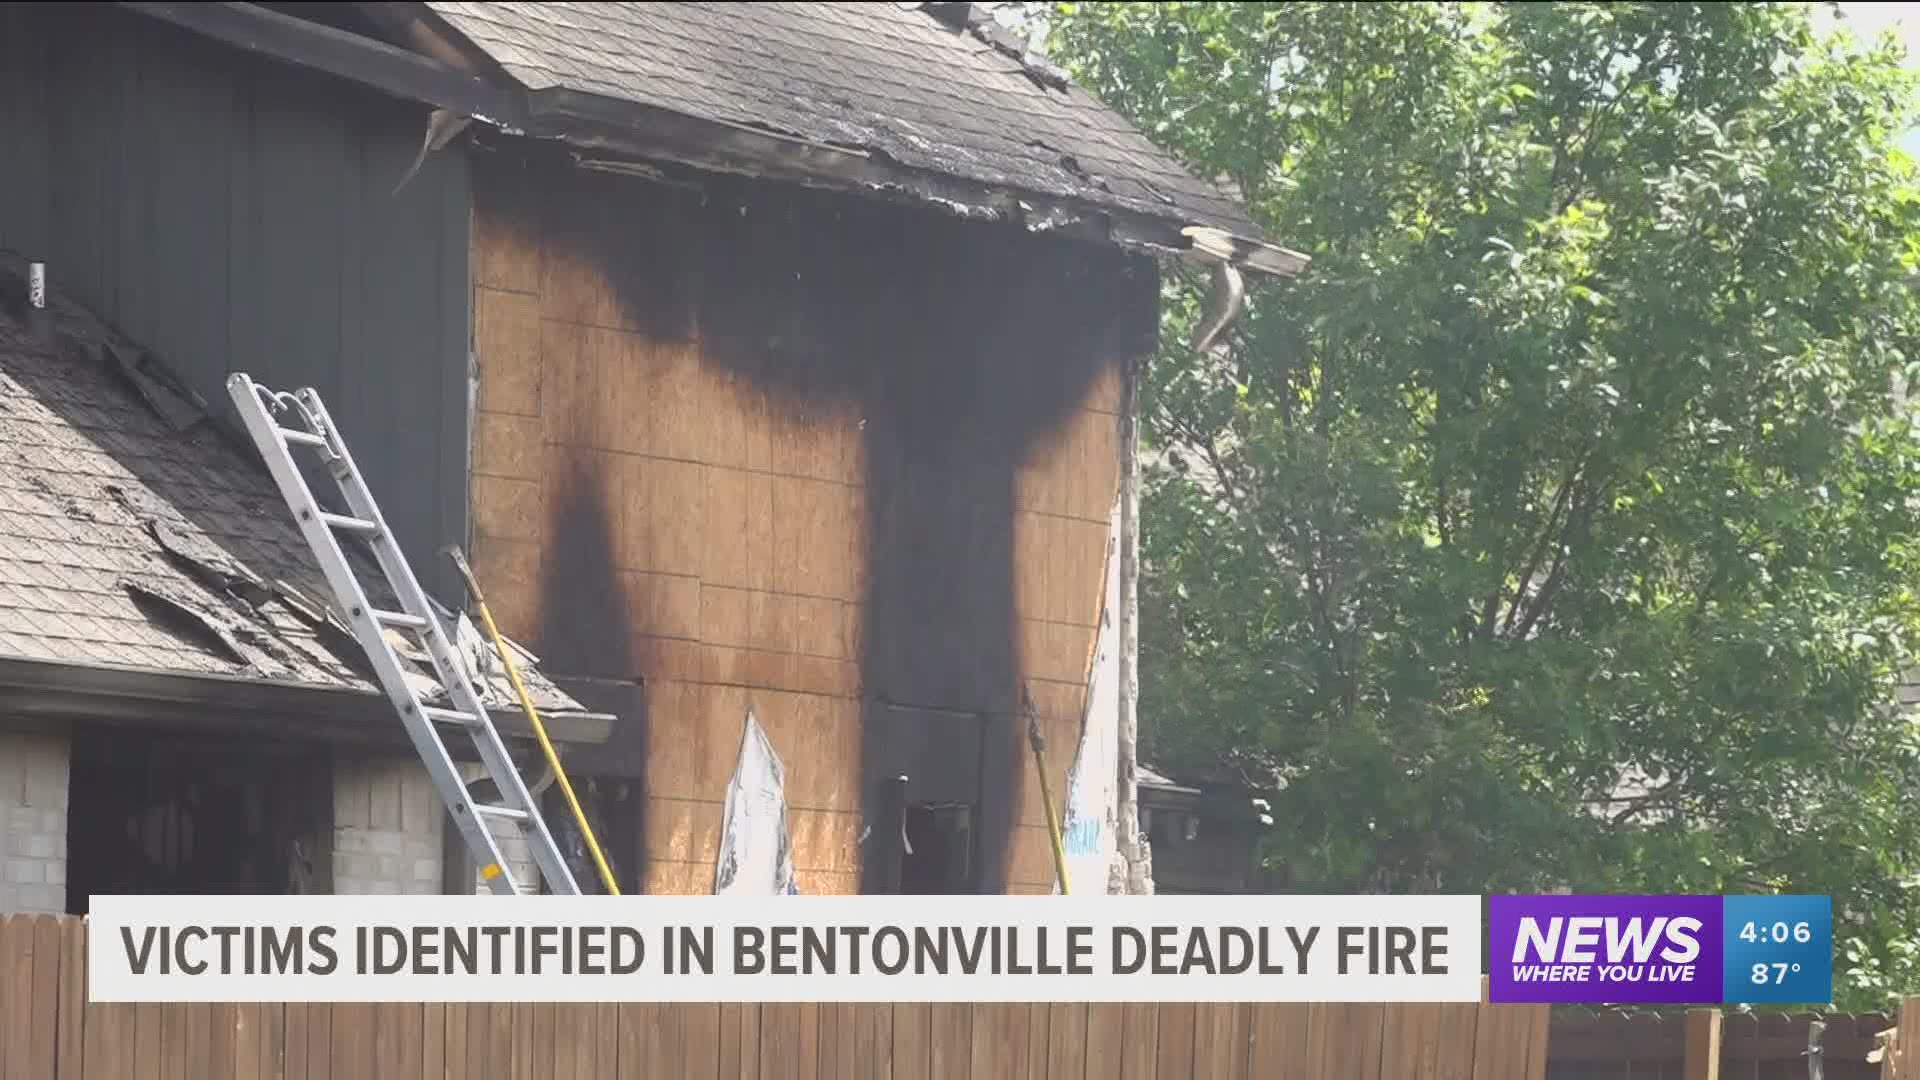 Two bodies were found inside the home the day of the fire, one with what is believed to be a self-inflicted gunshot wound to the head.